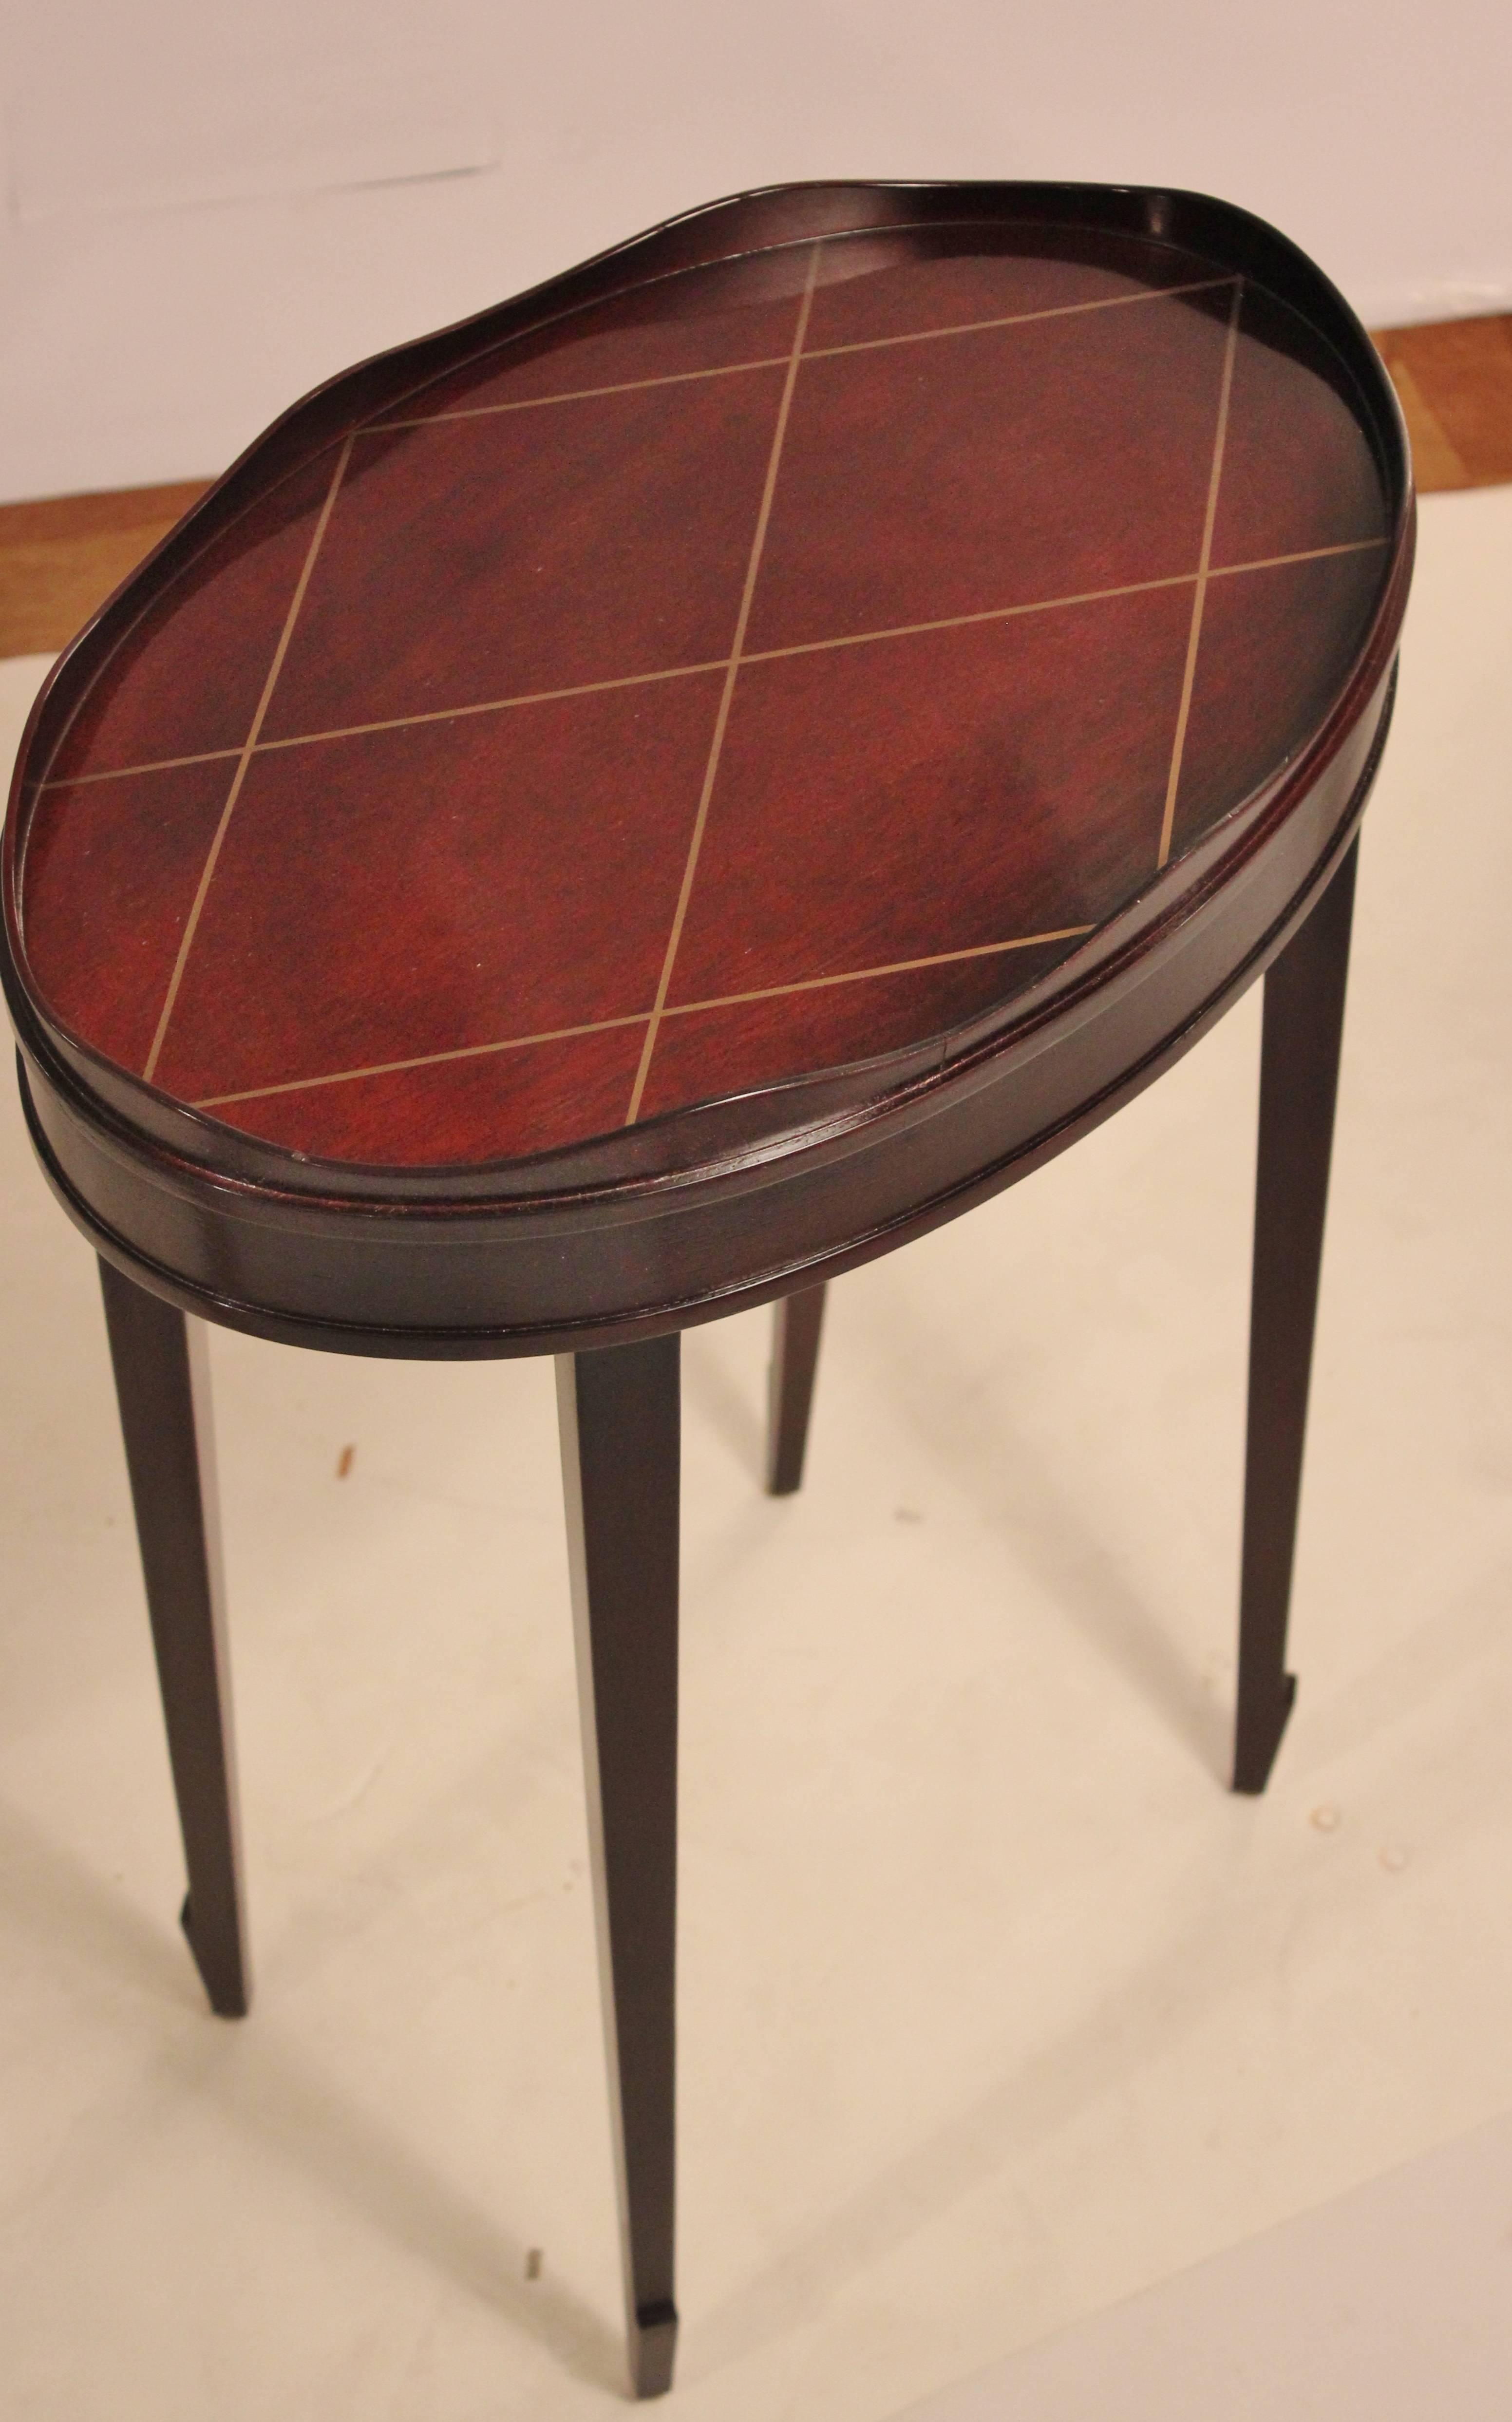 barbara barry side table